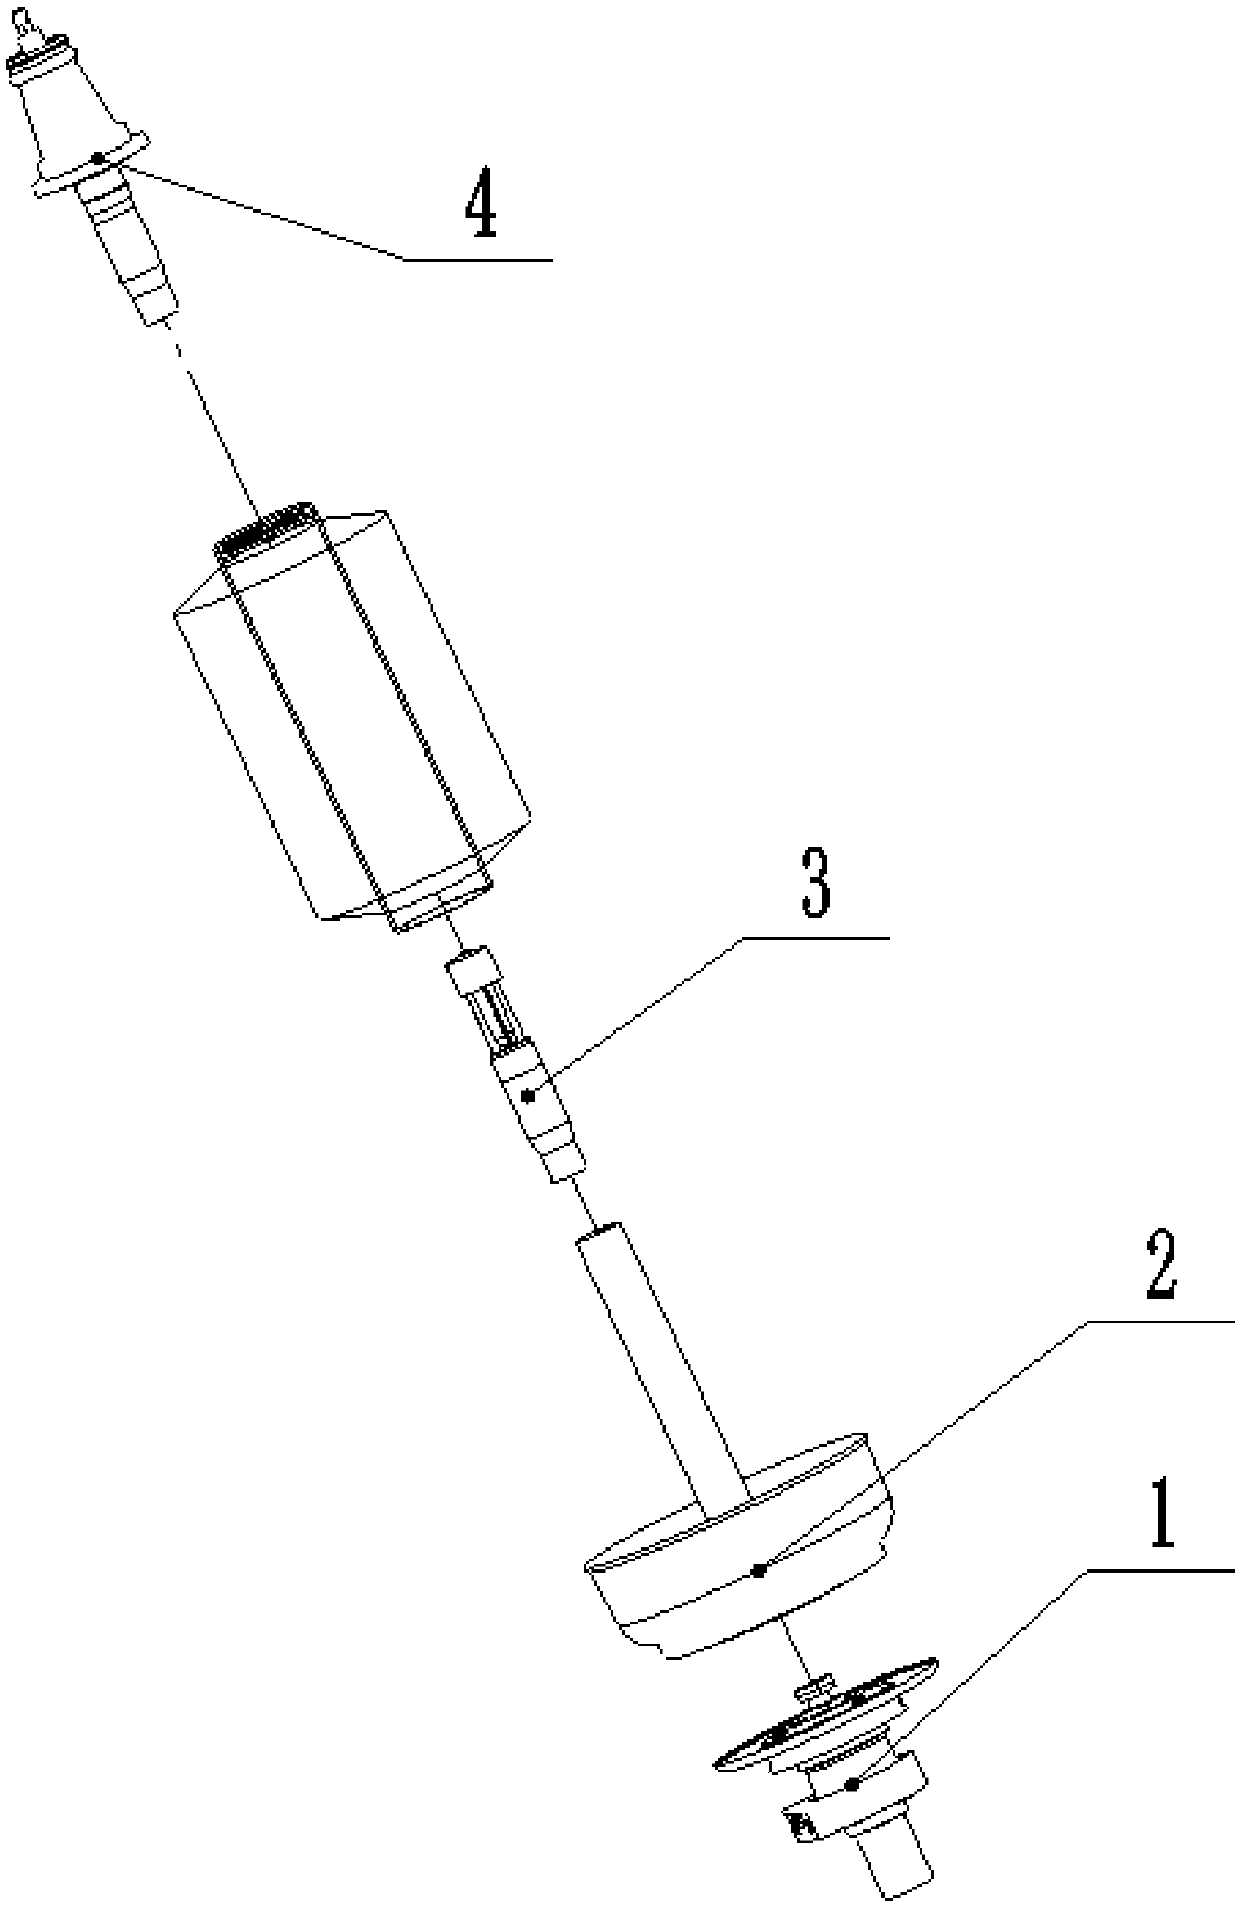 A Pneumatic Yarn Threading Two-for-One Twisting Spindle for Large Packages